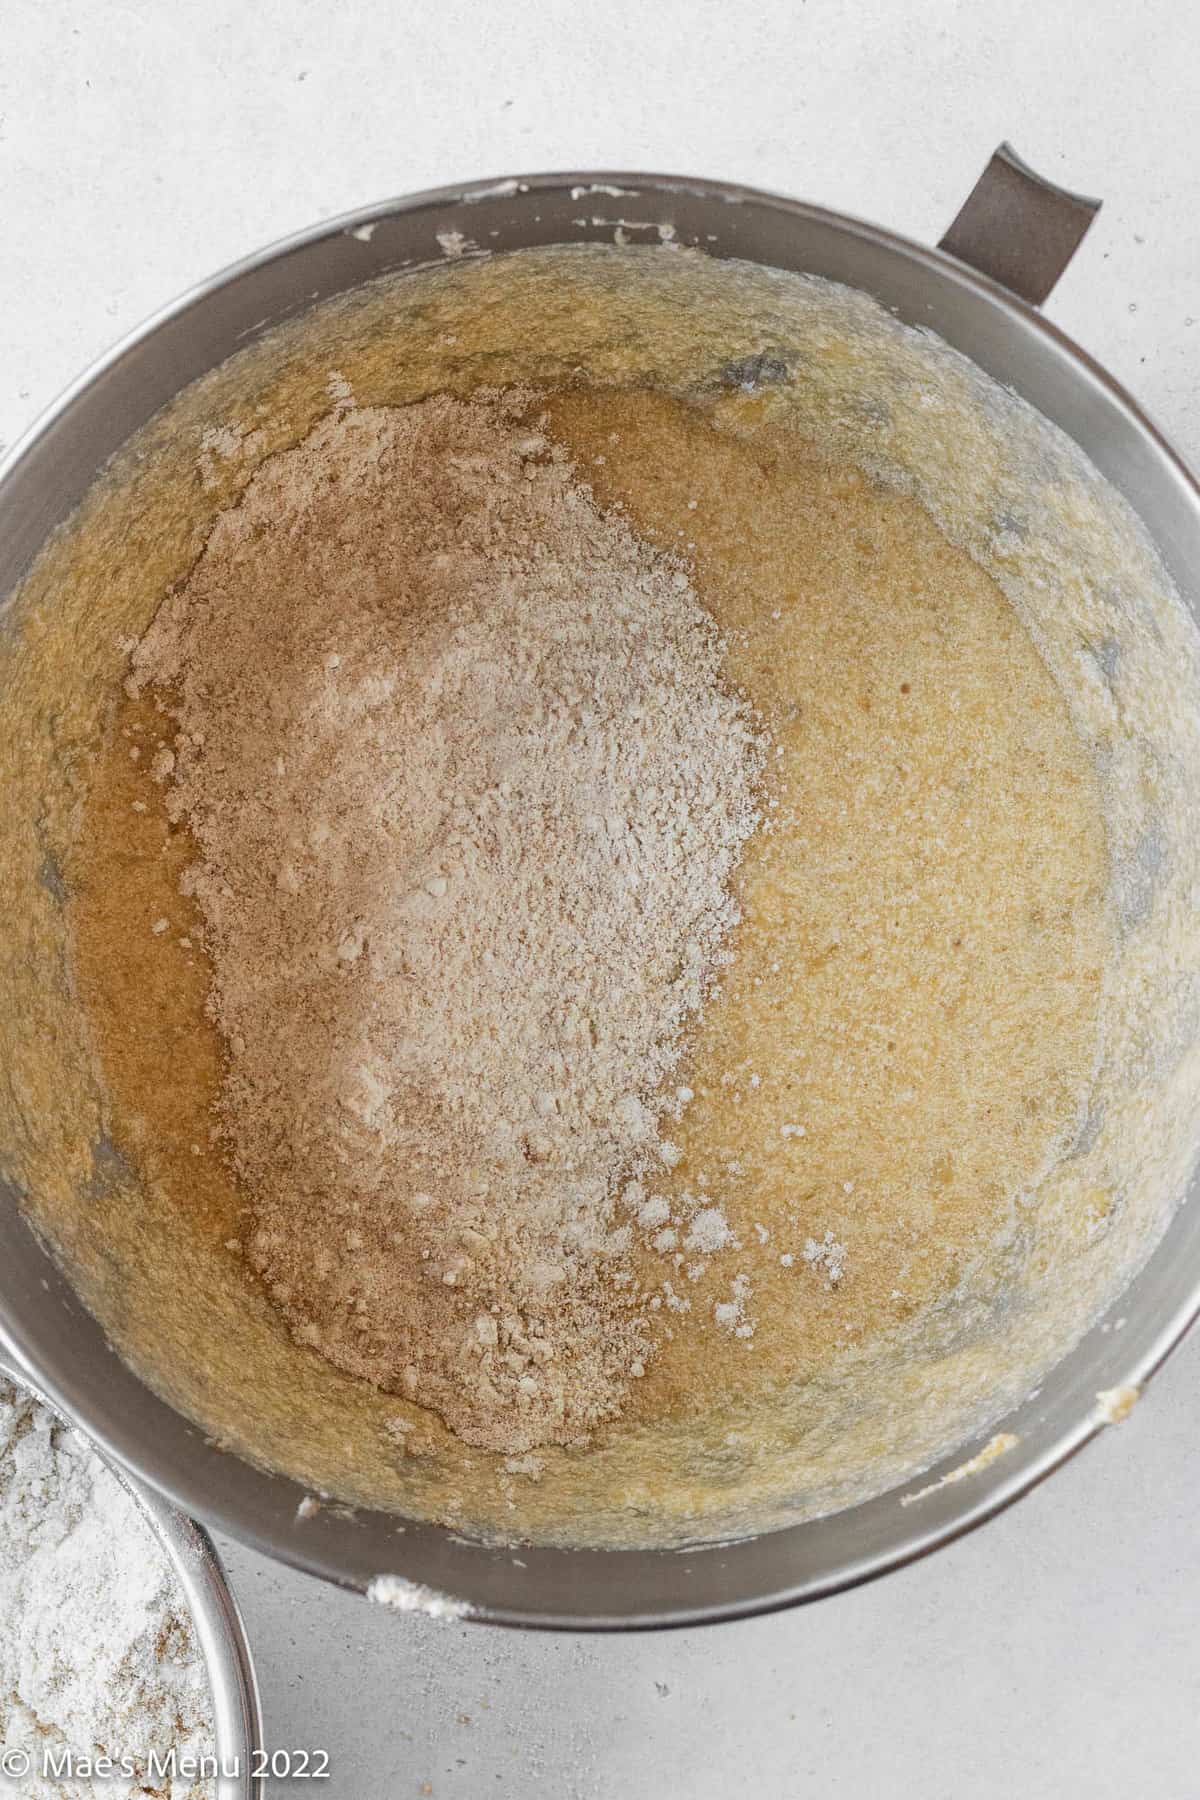 dry ingredients added to batter.